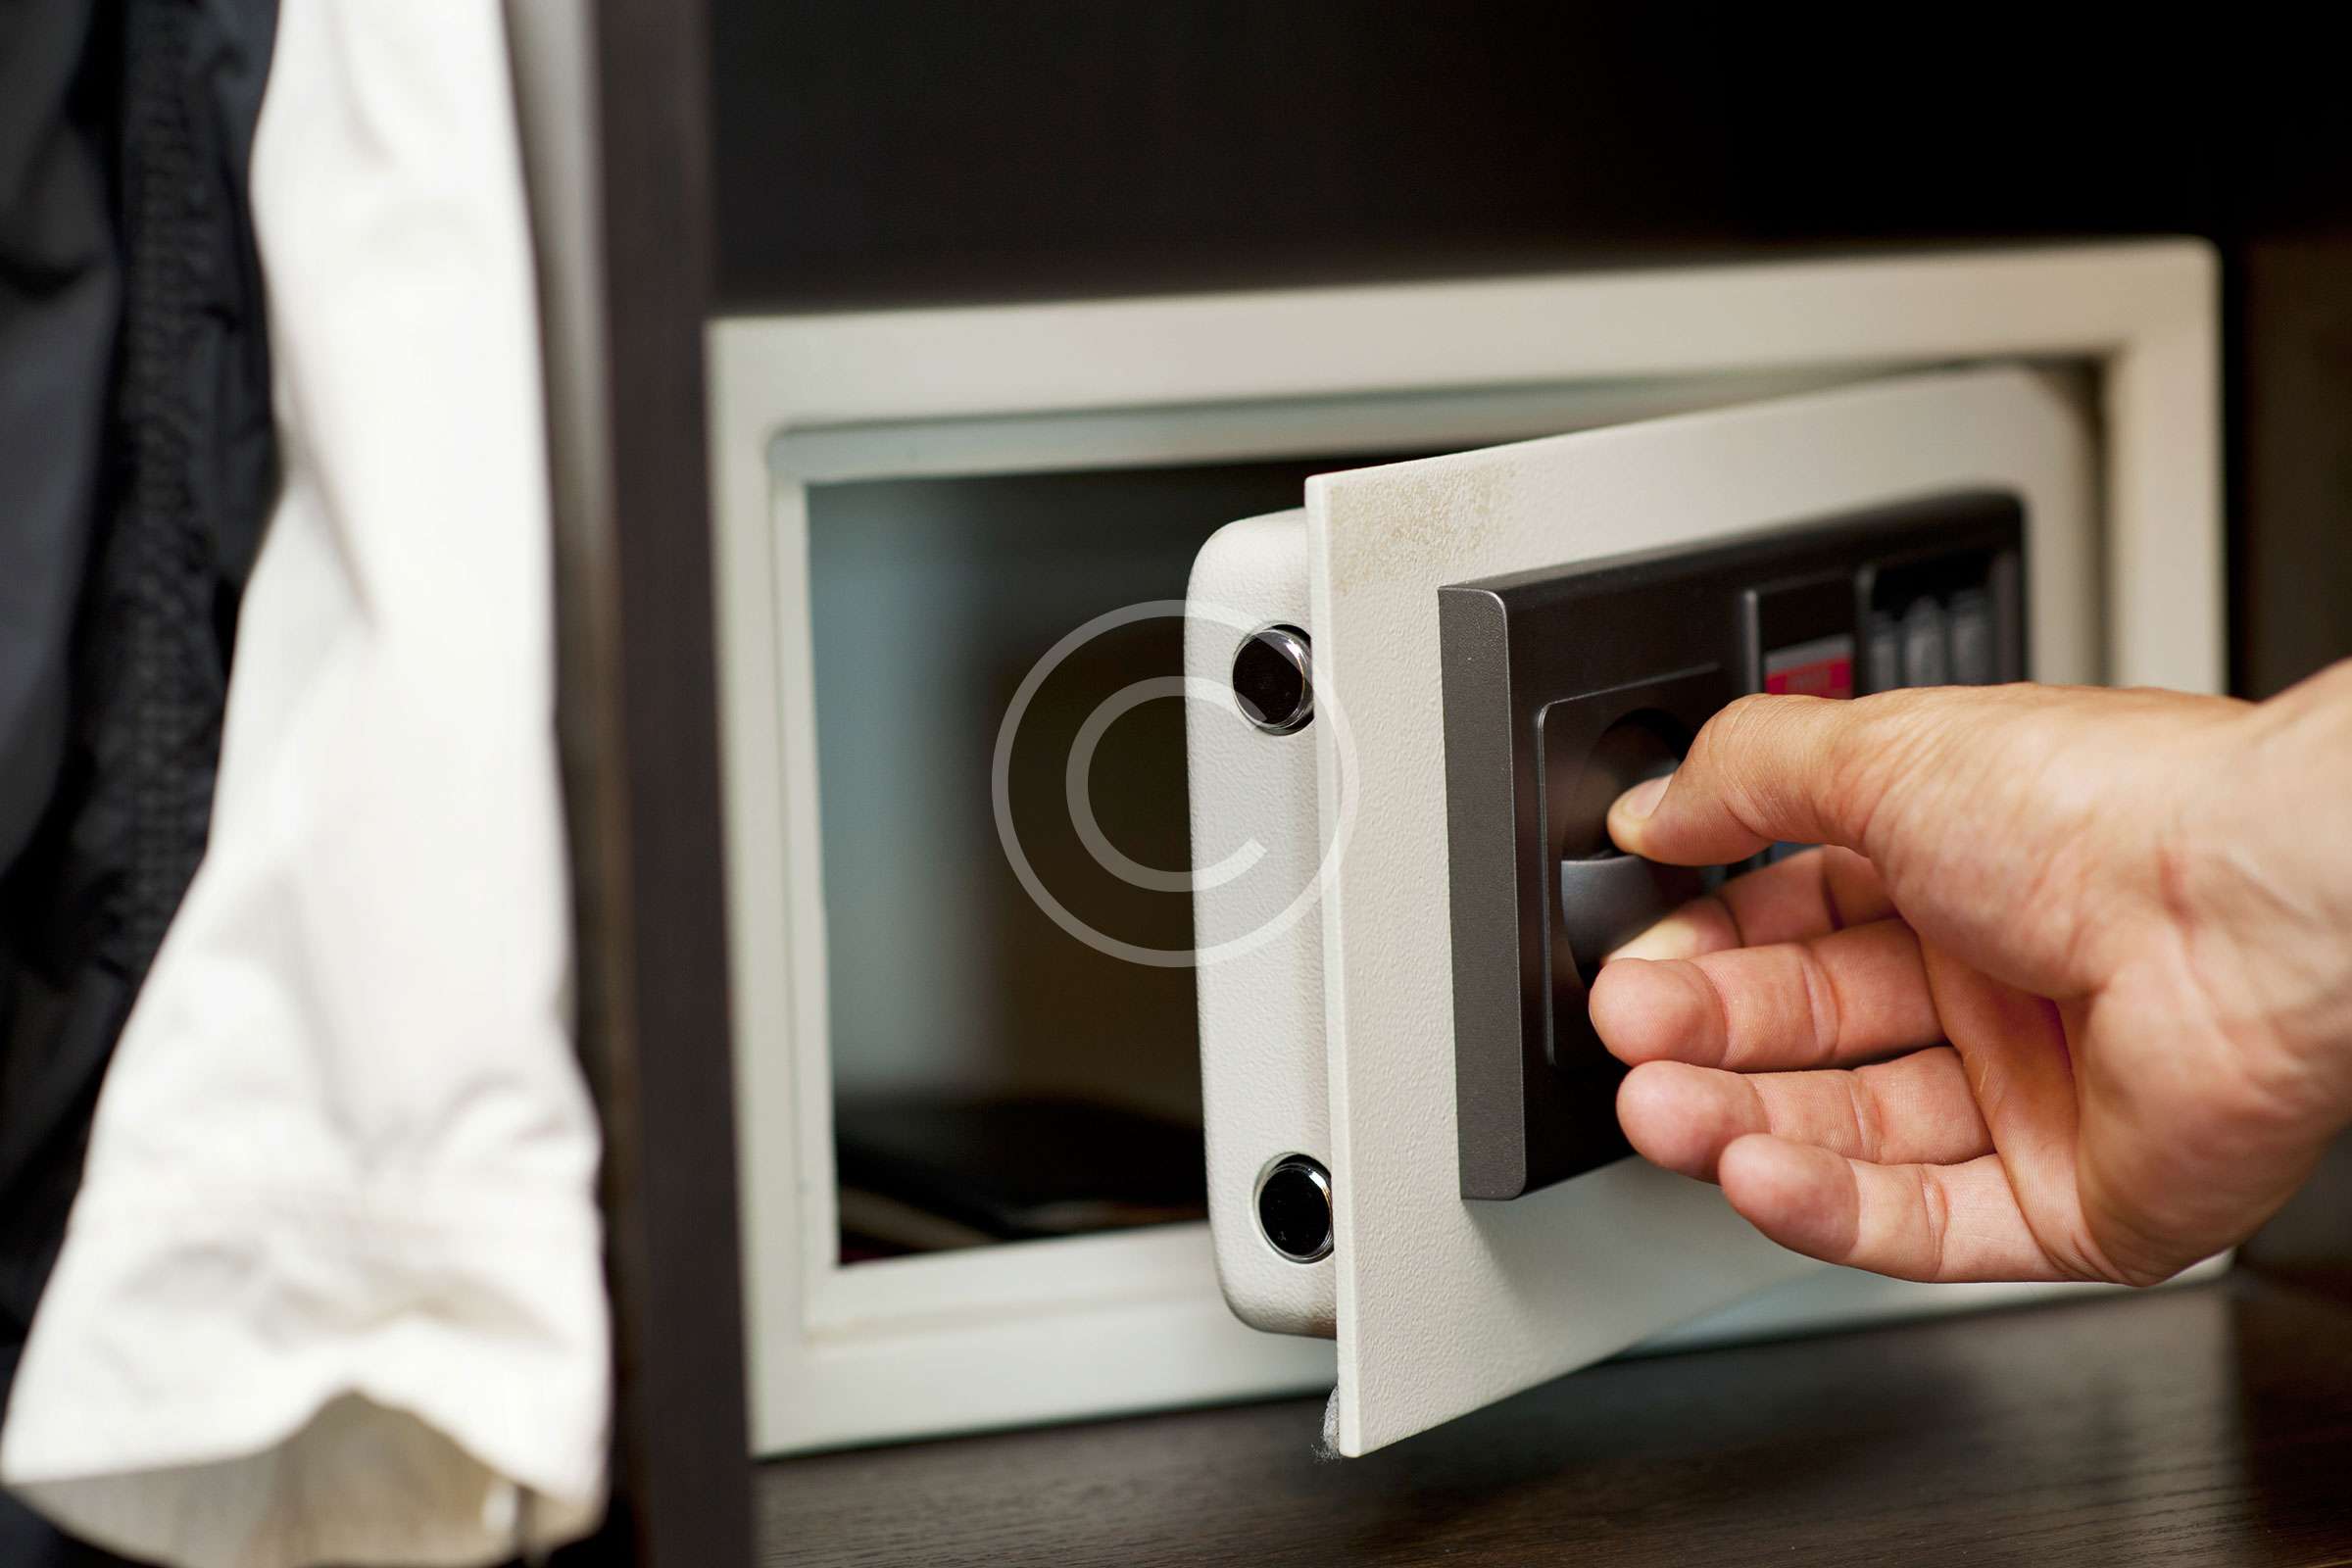 A person opening up an open microwave oven.